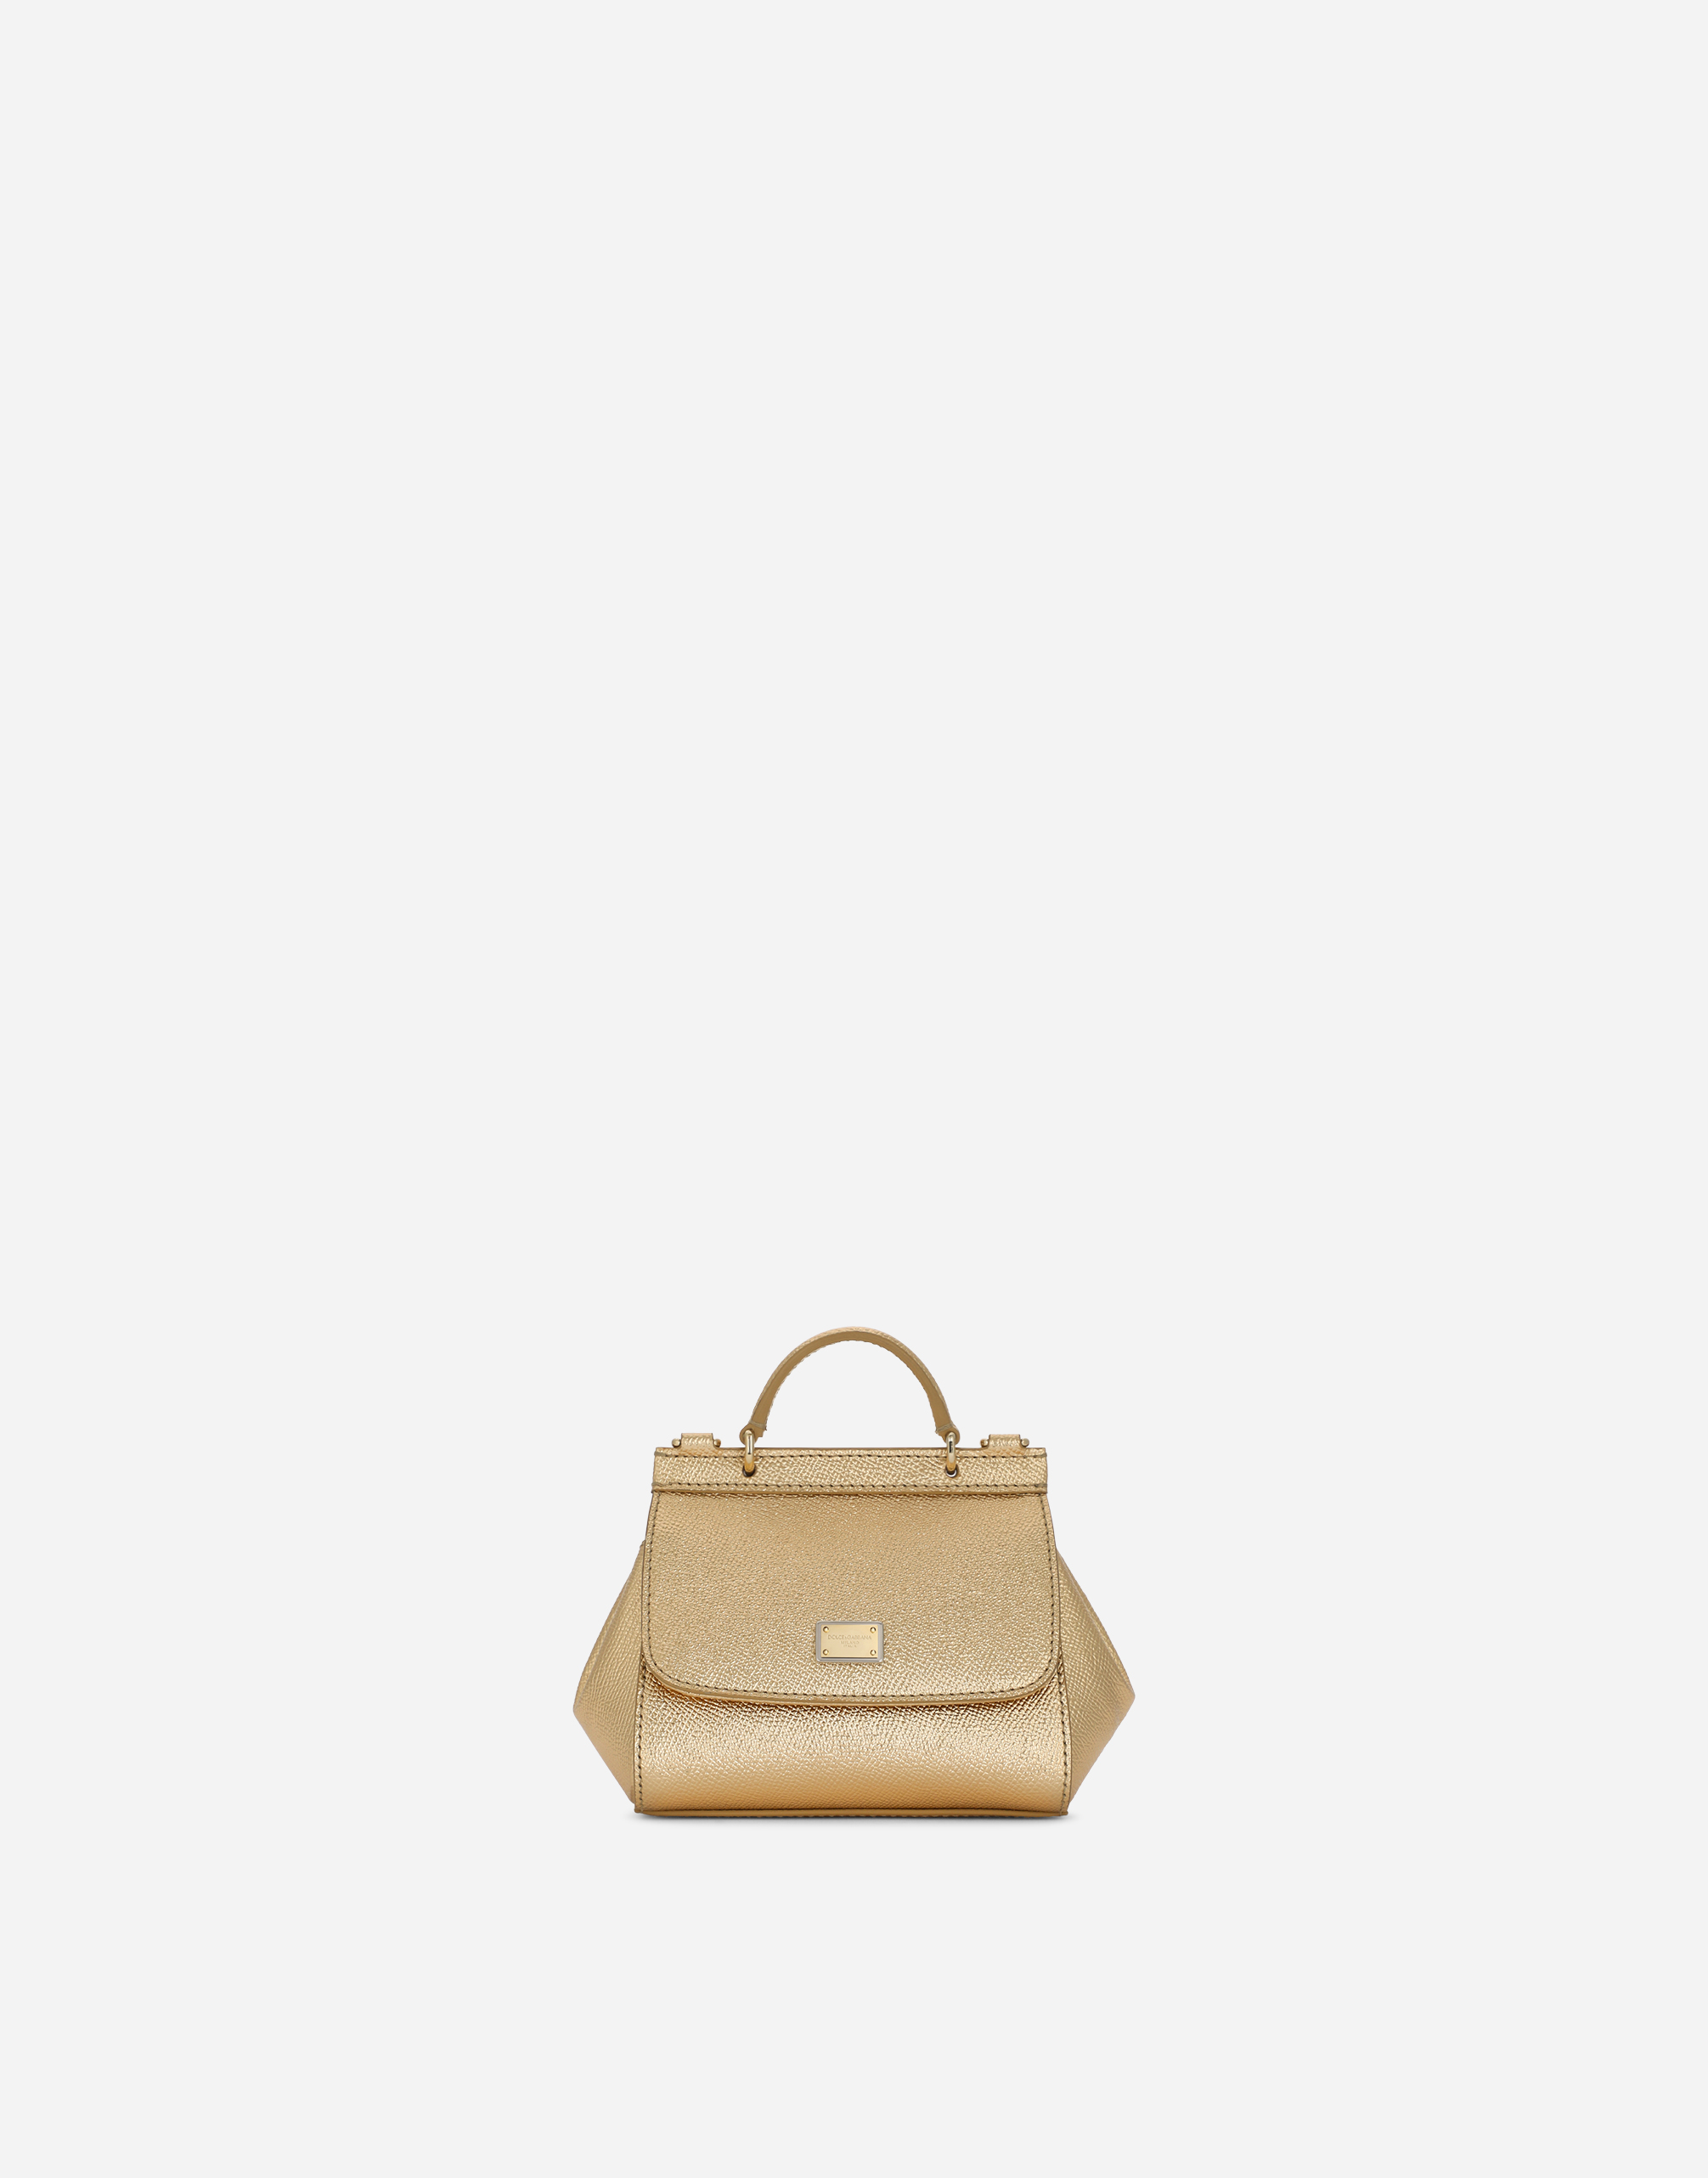 Sicily mini bag in Dauphine leather in Gold for Girls 